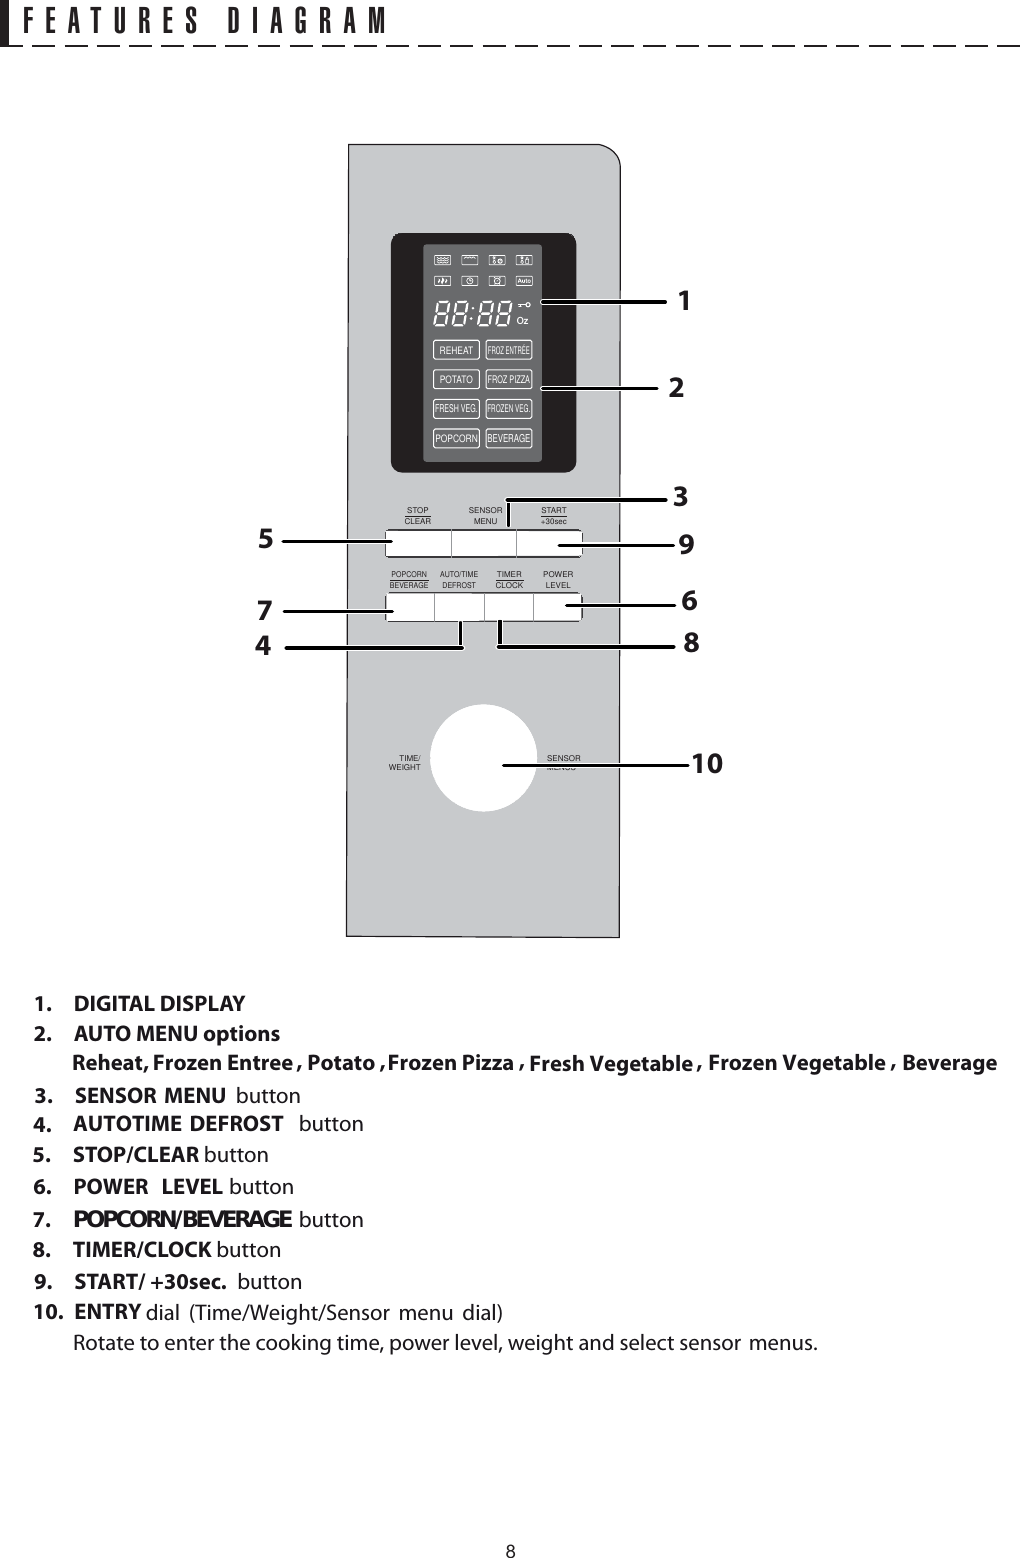 FEATURES DIAGRAM1. DIGITAL DISPLAY2.  AUTO MENU options buttonbuttonENTRY  Rotate to enter the cooking time, power level, weight and select sensor  menus. 6. POWER LEVELbutton Potato , Frozen Pizza ,  Frozen Vegetable , Beverage Reheat ,  Frozen Entree , Fresh Vegetable dial (Time/Weight/Sensor menu dial)button button 6834510. 8. TIMER/CLOCK 5. STOP/CLEAR 7.  POPCORN/BEVERAGE3. 9. START/ +30sec.4. STOPCLEARAUTO/TIMEDEFROSTTIMERCLOCKPOWERLEVELSENSORMENUSTART+30secOzREHEATFRESH VEG.FROZEN VEG.POPCORN BEVERAGE FROZ ENTRÉEPOTATOFROZ PIZZASENSORMENUSTIME/WEIGHTPOPCORNBEVERAGE12SENSOR MENU910   buttonbuttonAUTOTIME DEFROST7 ,8